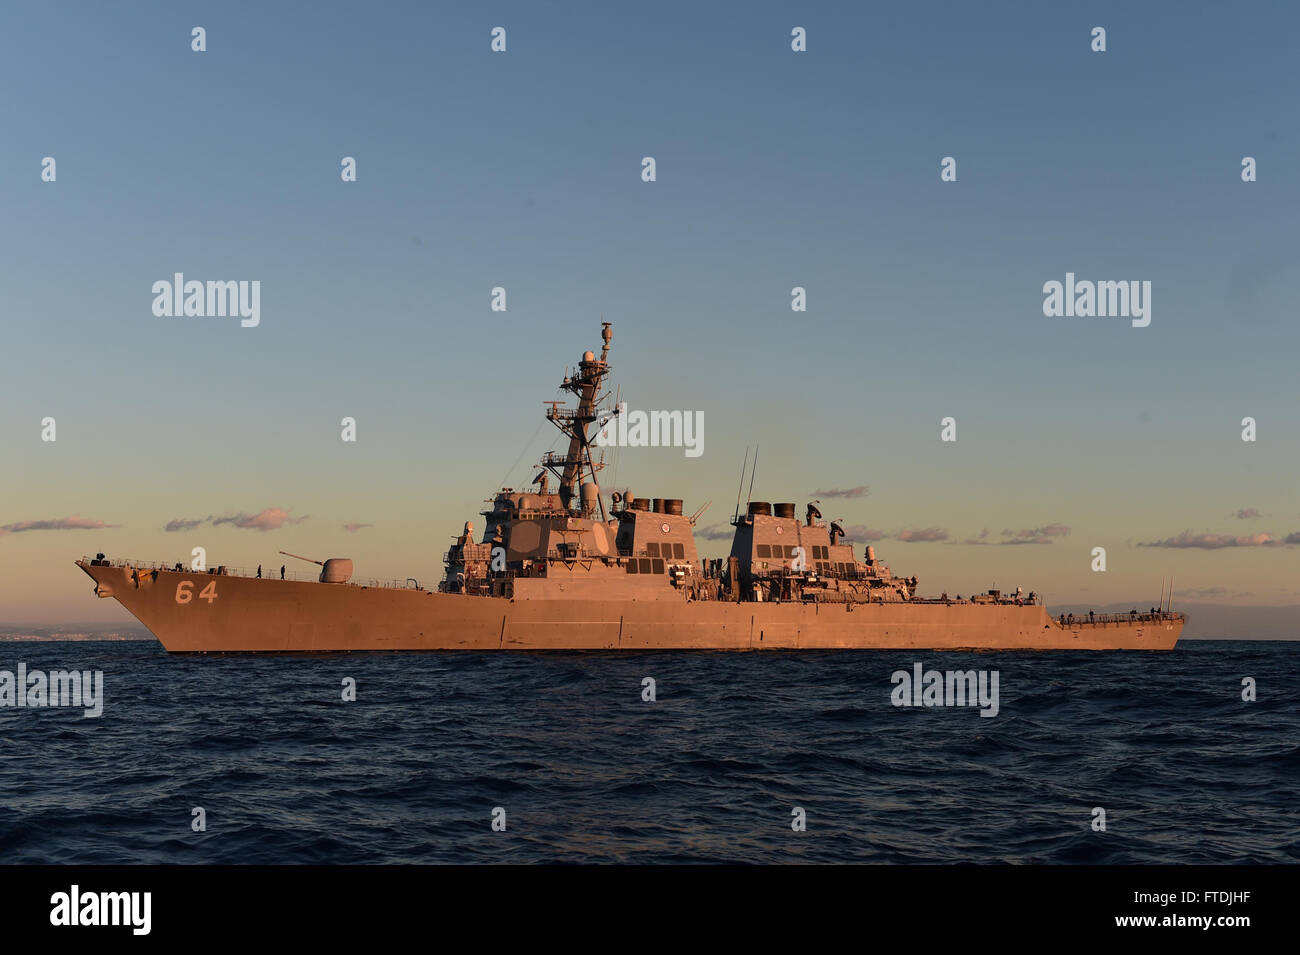 151206-N-FP878-121 MEDITERRANEAN SEA (Dec. 6, 2015). USS Carney (DDG 64) awaits the return of its small boat crew during a passenger transfer Dec. 6, 2015.  Carney, an Arleigh Burke-class guided missile destroyer, forward deployed to Rota, Spain, is conducting a routine patrol in the U. S. 6th Fleet area of operations in support of U.S. national security interests in Europe.  (U.S. Navy photo by Mass Communication Specialist 1st Class Theron J. Godbold/Released) Stock Photo